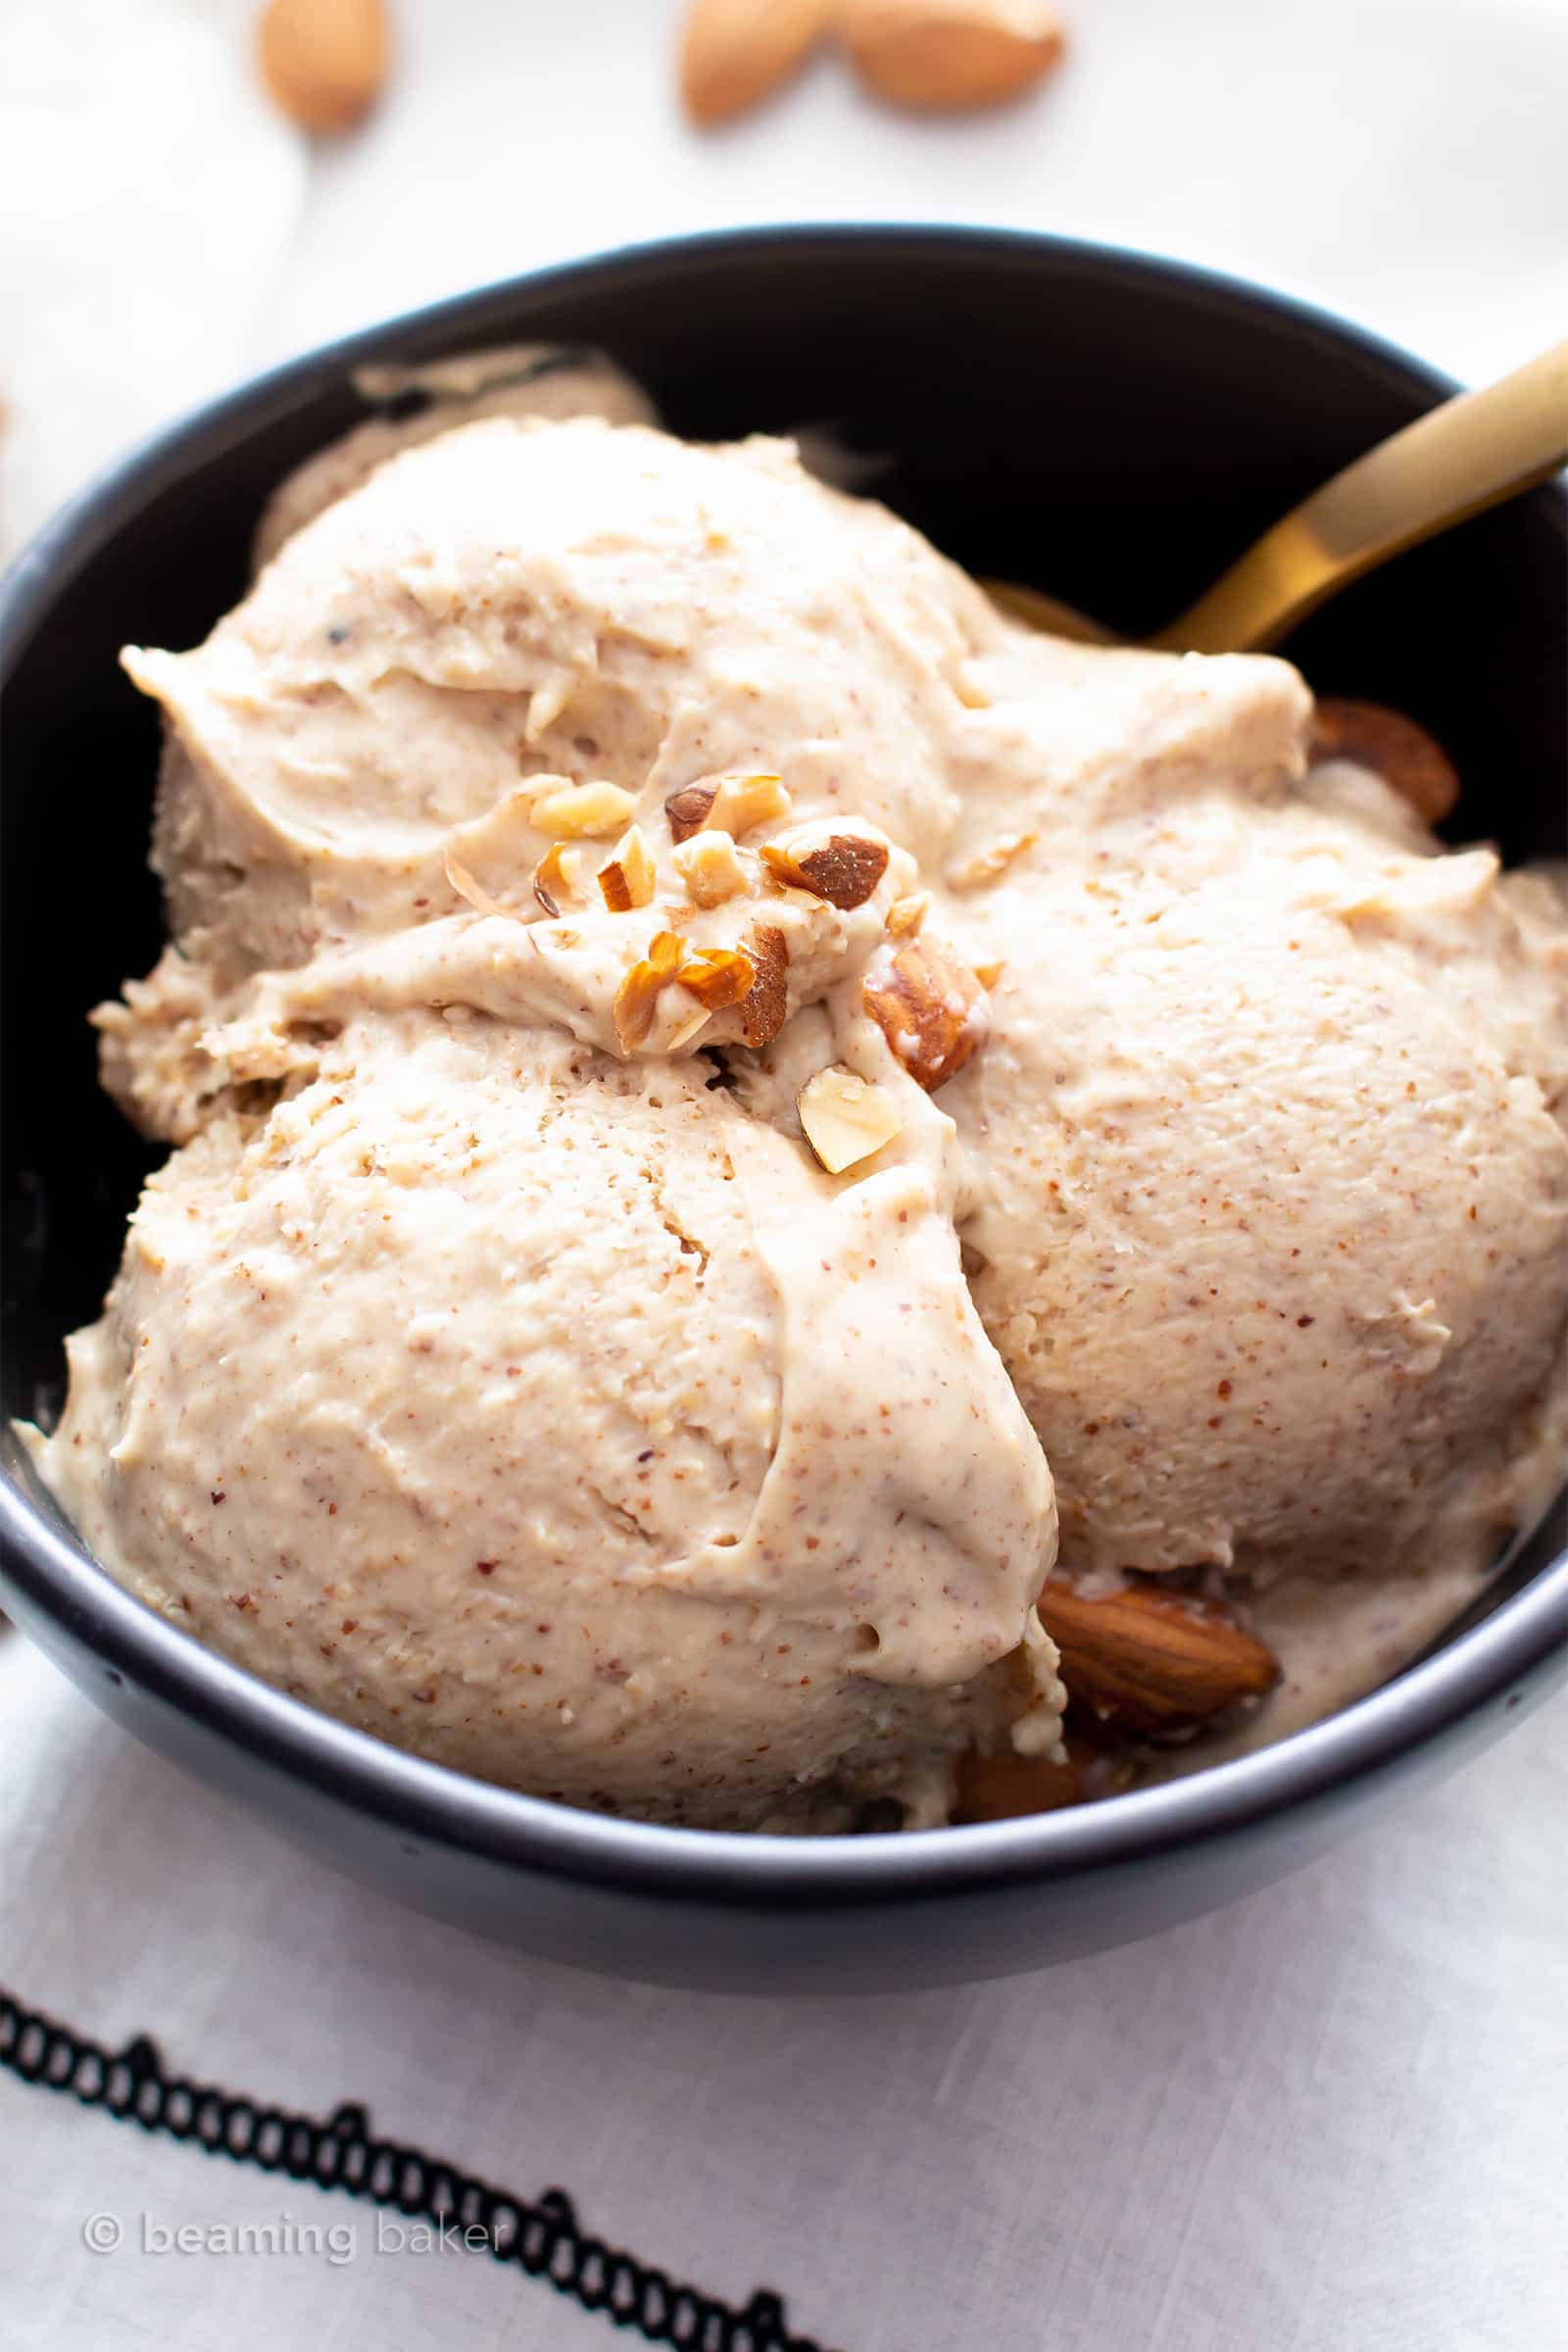 4 Ingredient Paleo Almond Butter Ice Cream (Vegan, Keto): creamy, luscious almond butter vegan ice cream in 5 minutes—no churn, easy! This keto ice cream recipe is silky smooth, dairy-free, made without an ice cream maker. #Paleo #Keto #Vegan #IceCream #AlmondButter #DairyFree | Recipe at BeamingBaker.com